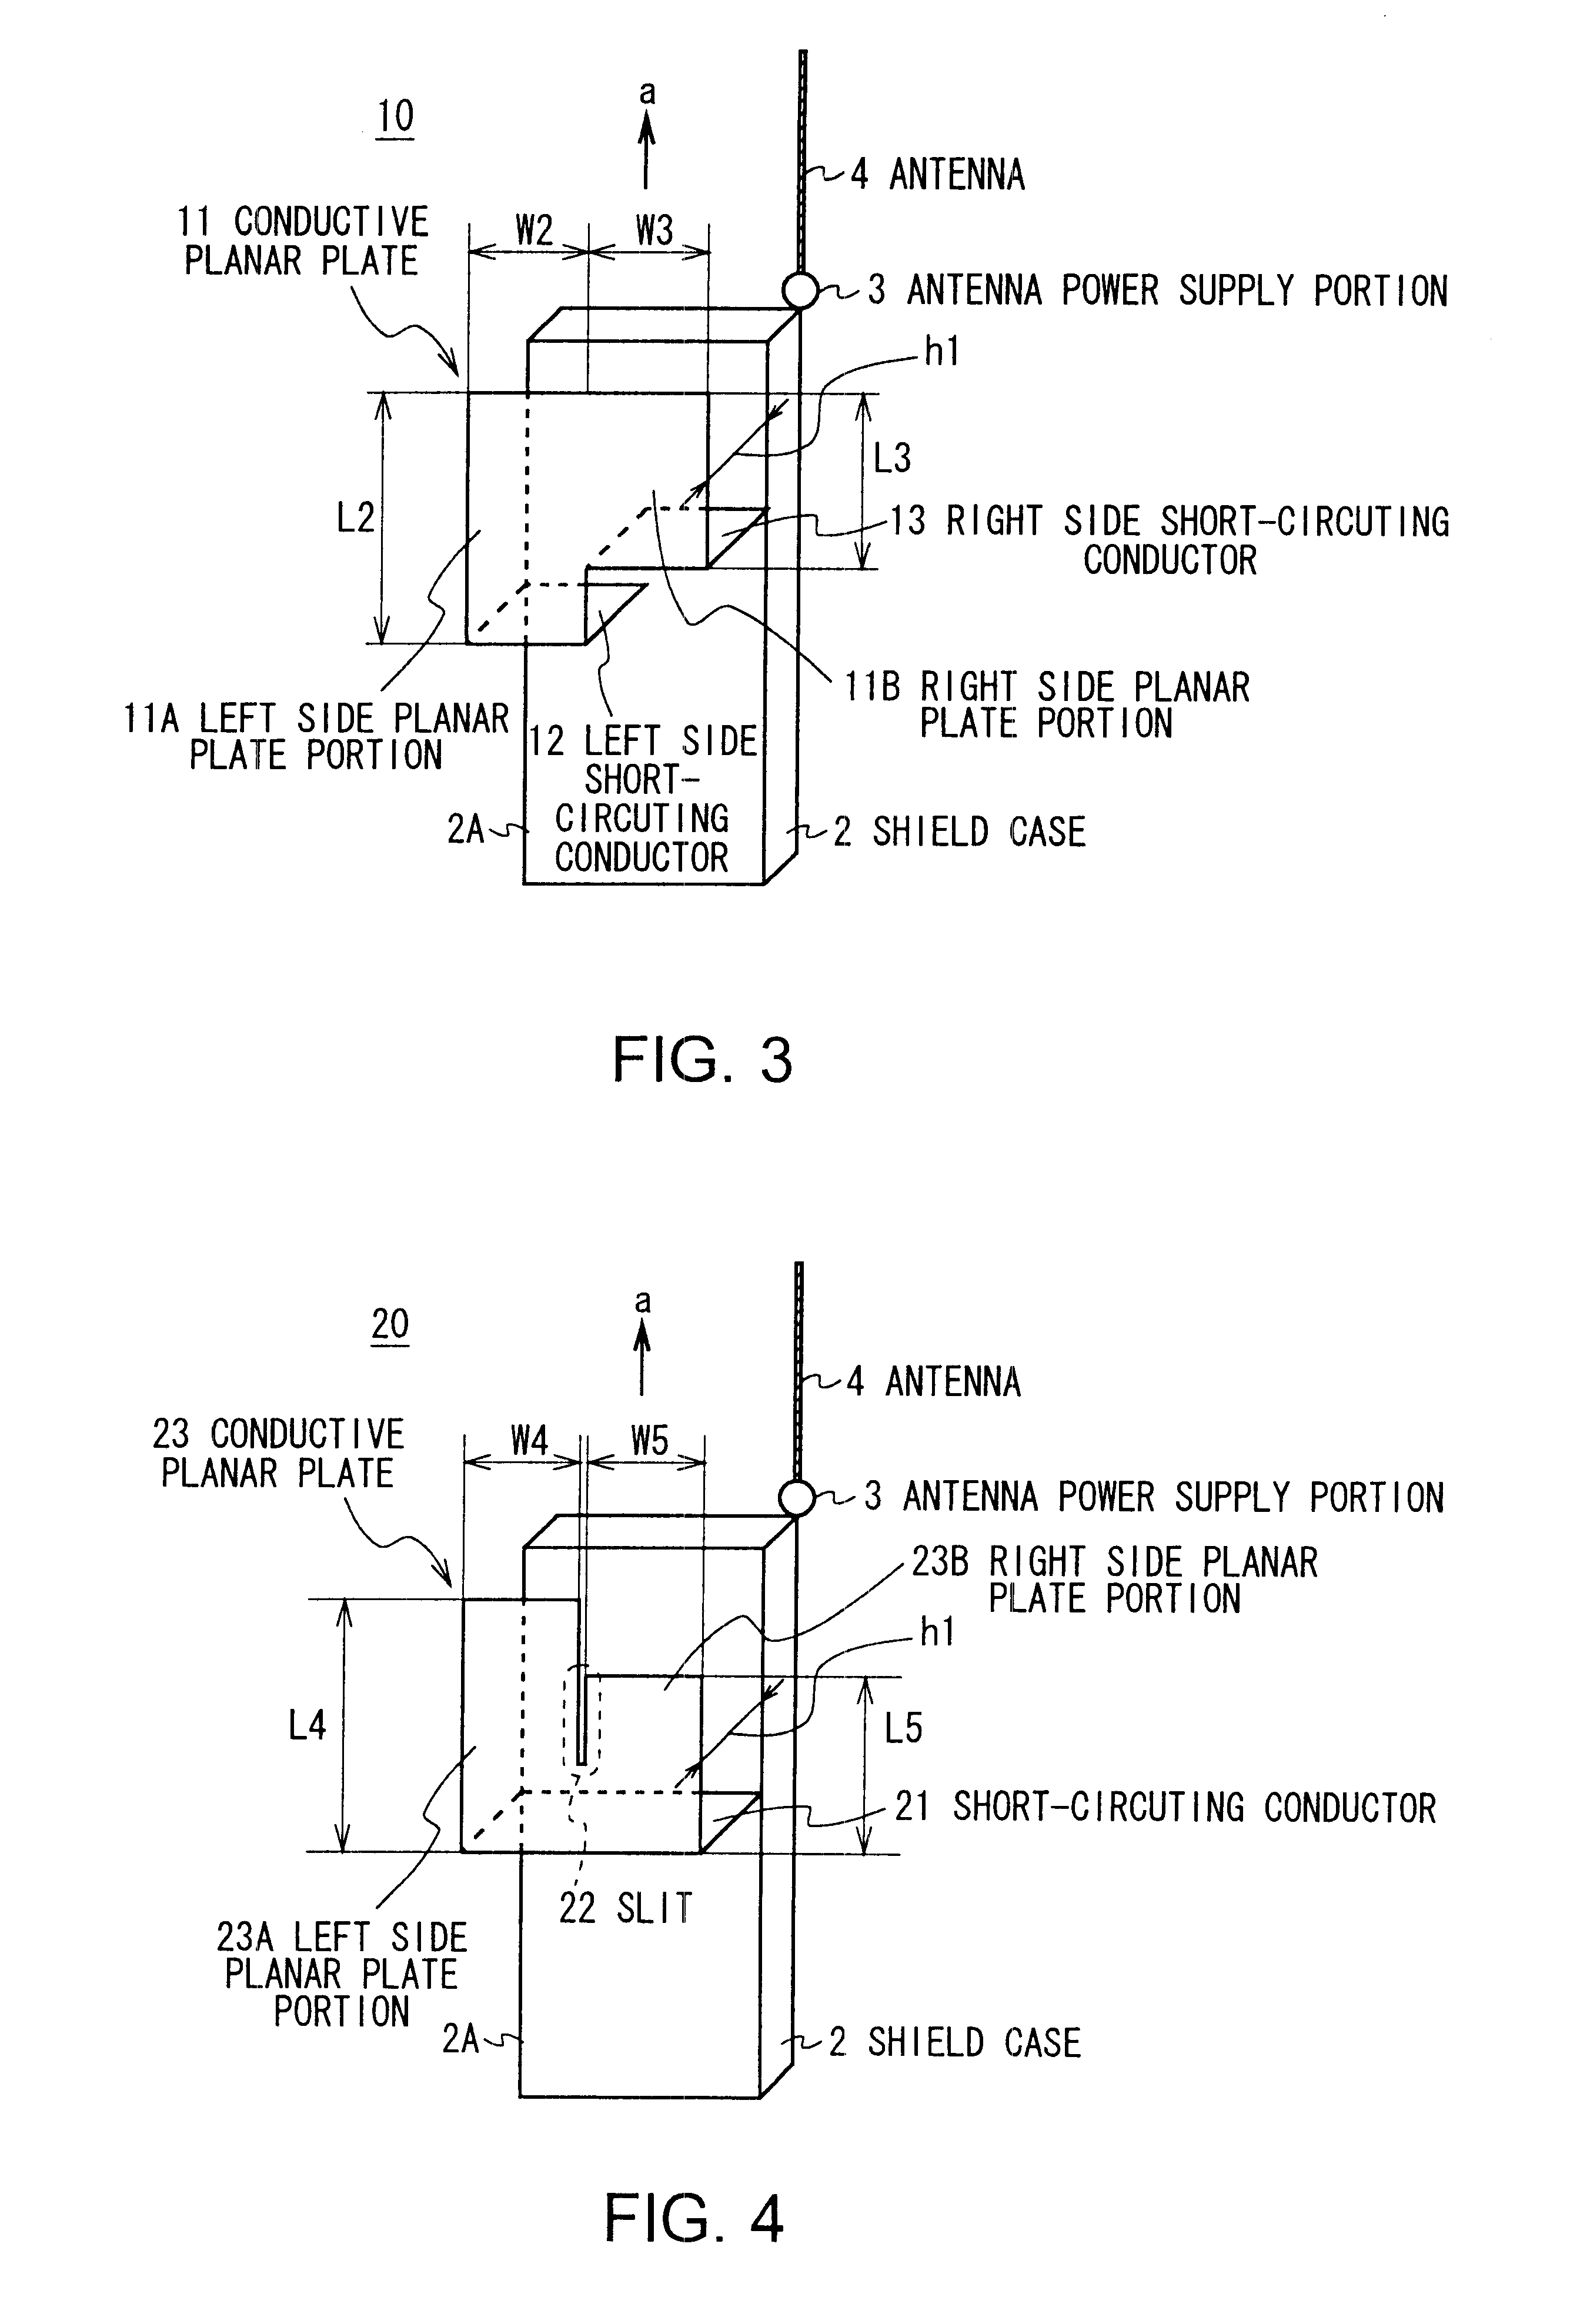 Antenna device and portable wireless communication apparatus